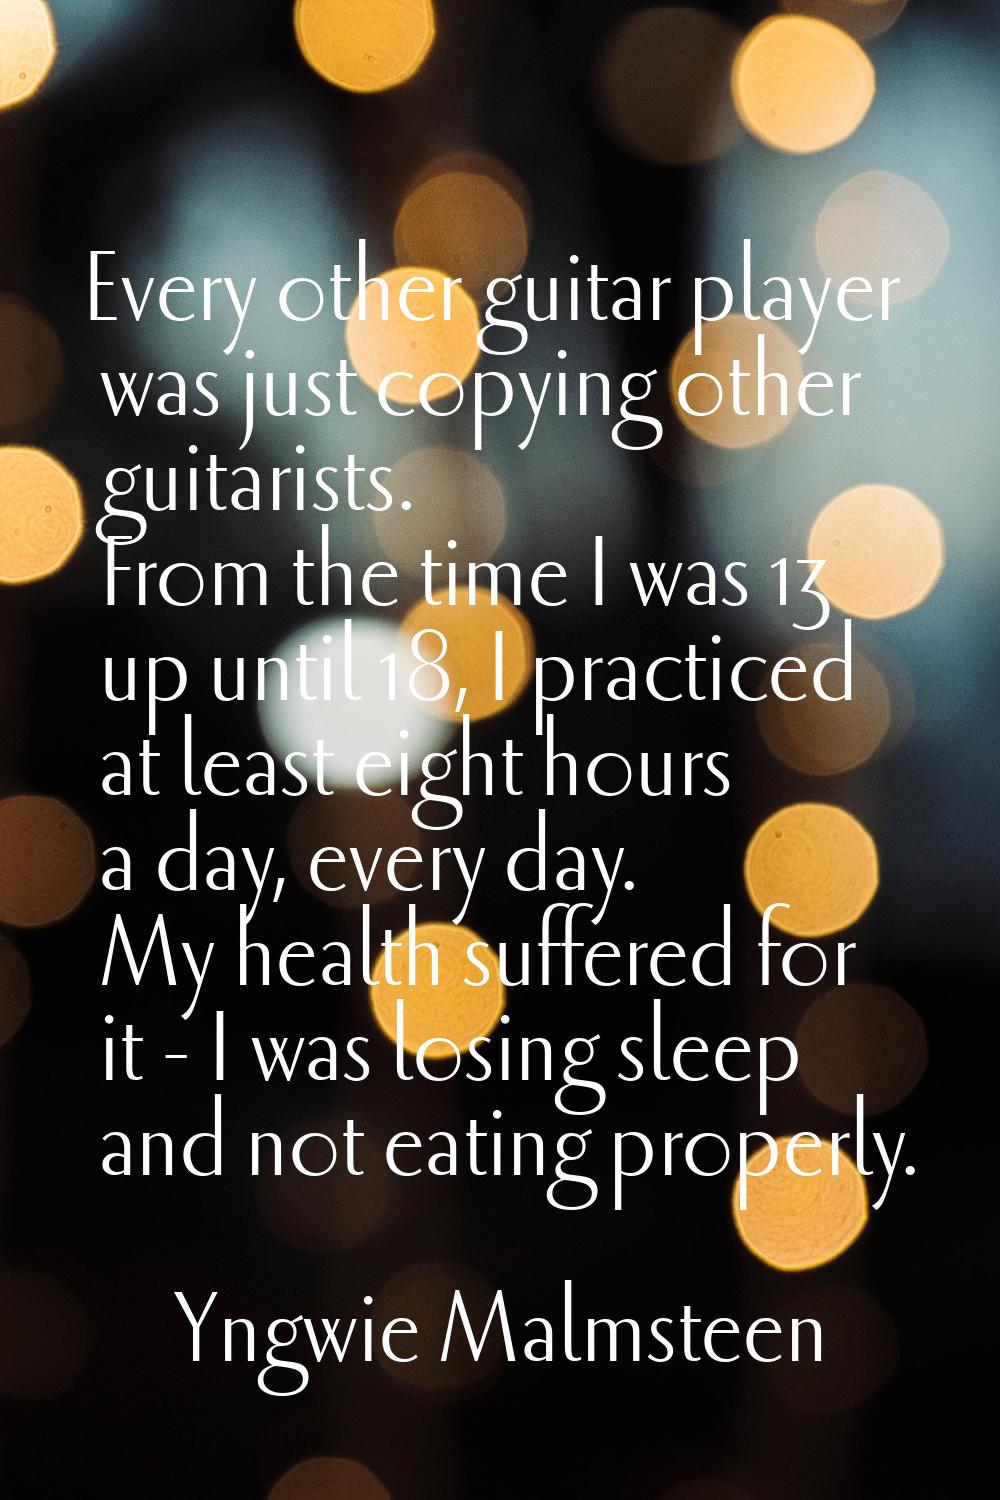 Every other guitar player was just copying other guitarists. From the time I was 13 up until 18, I 